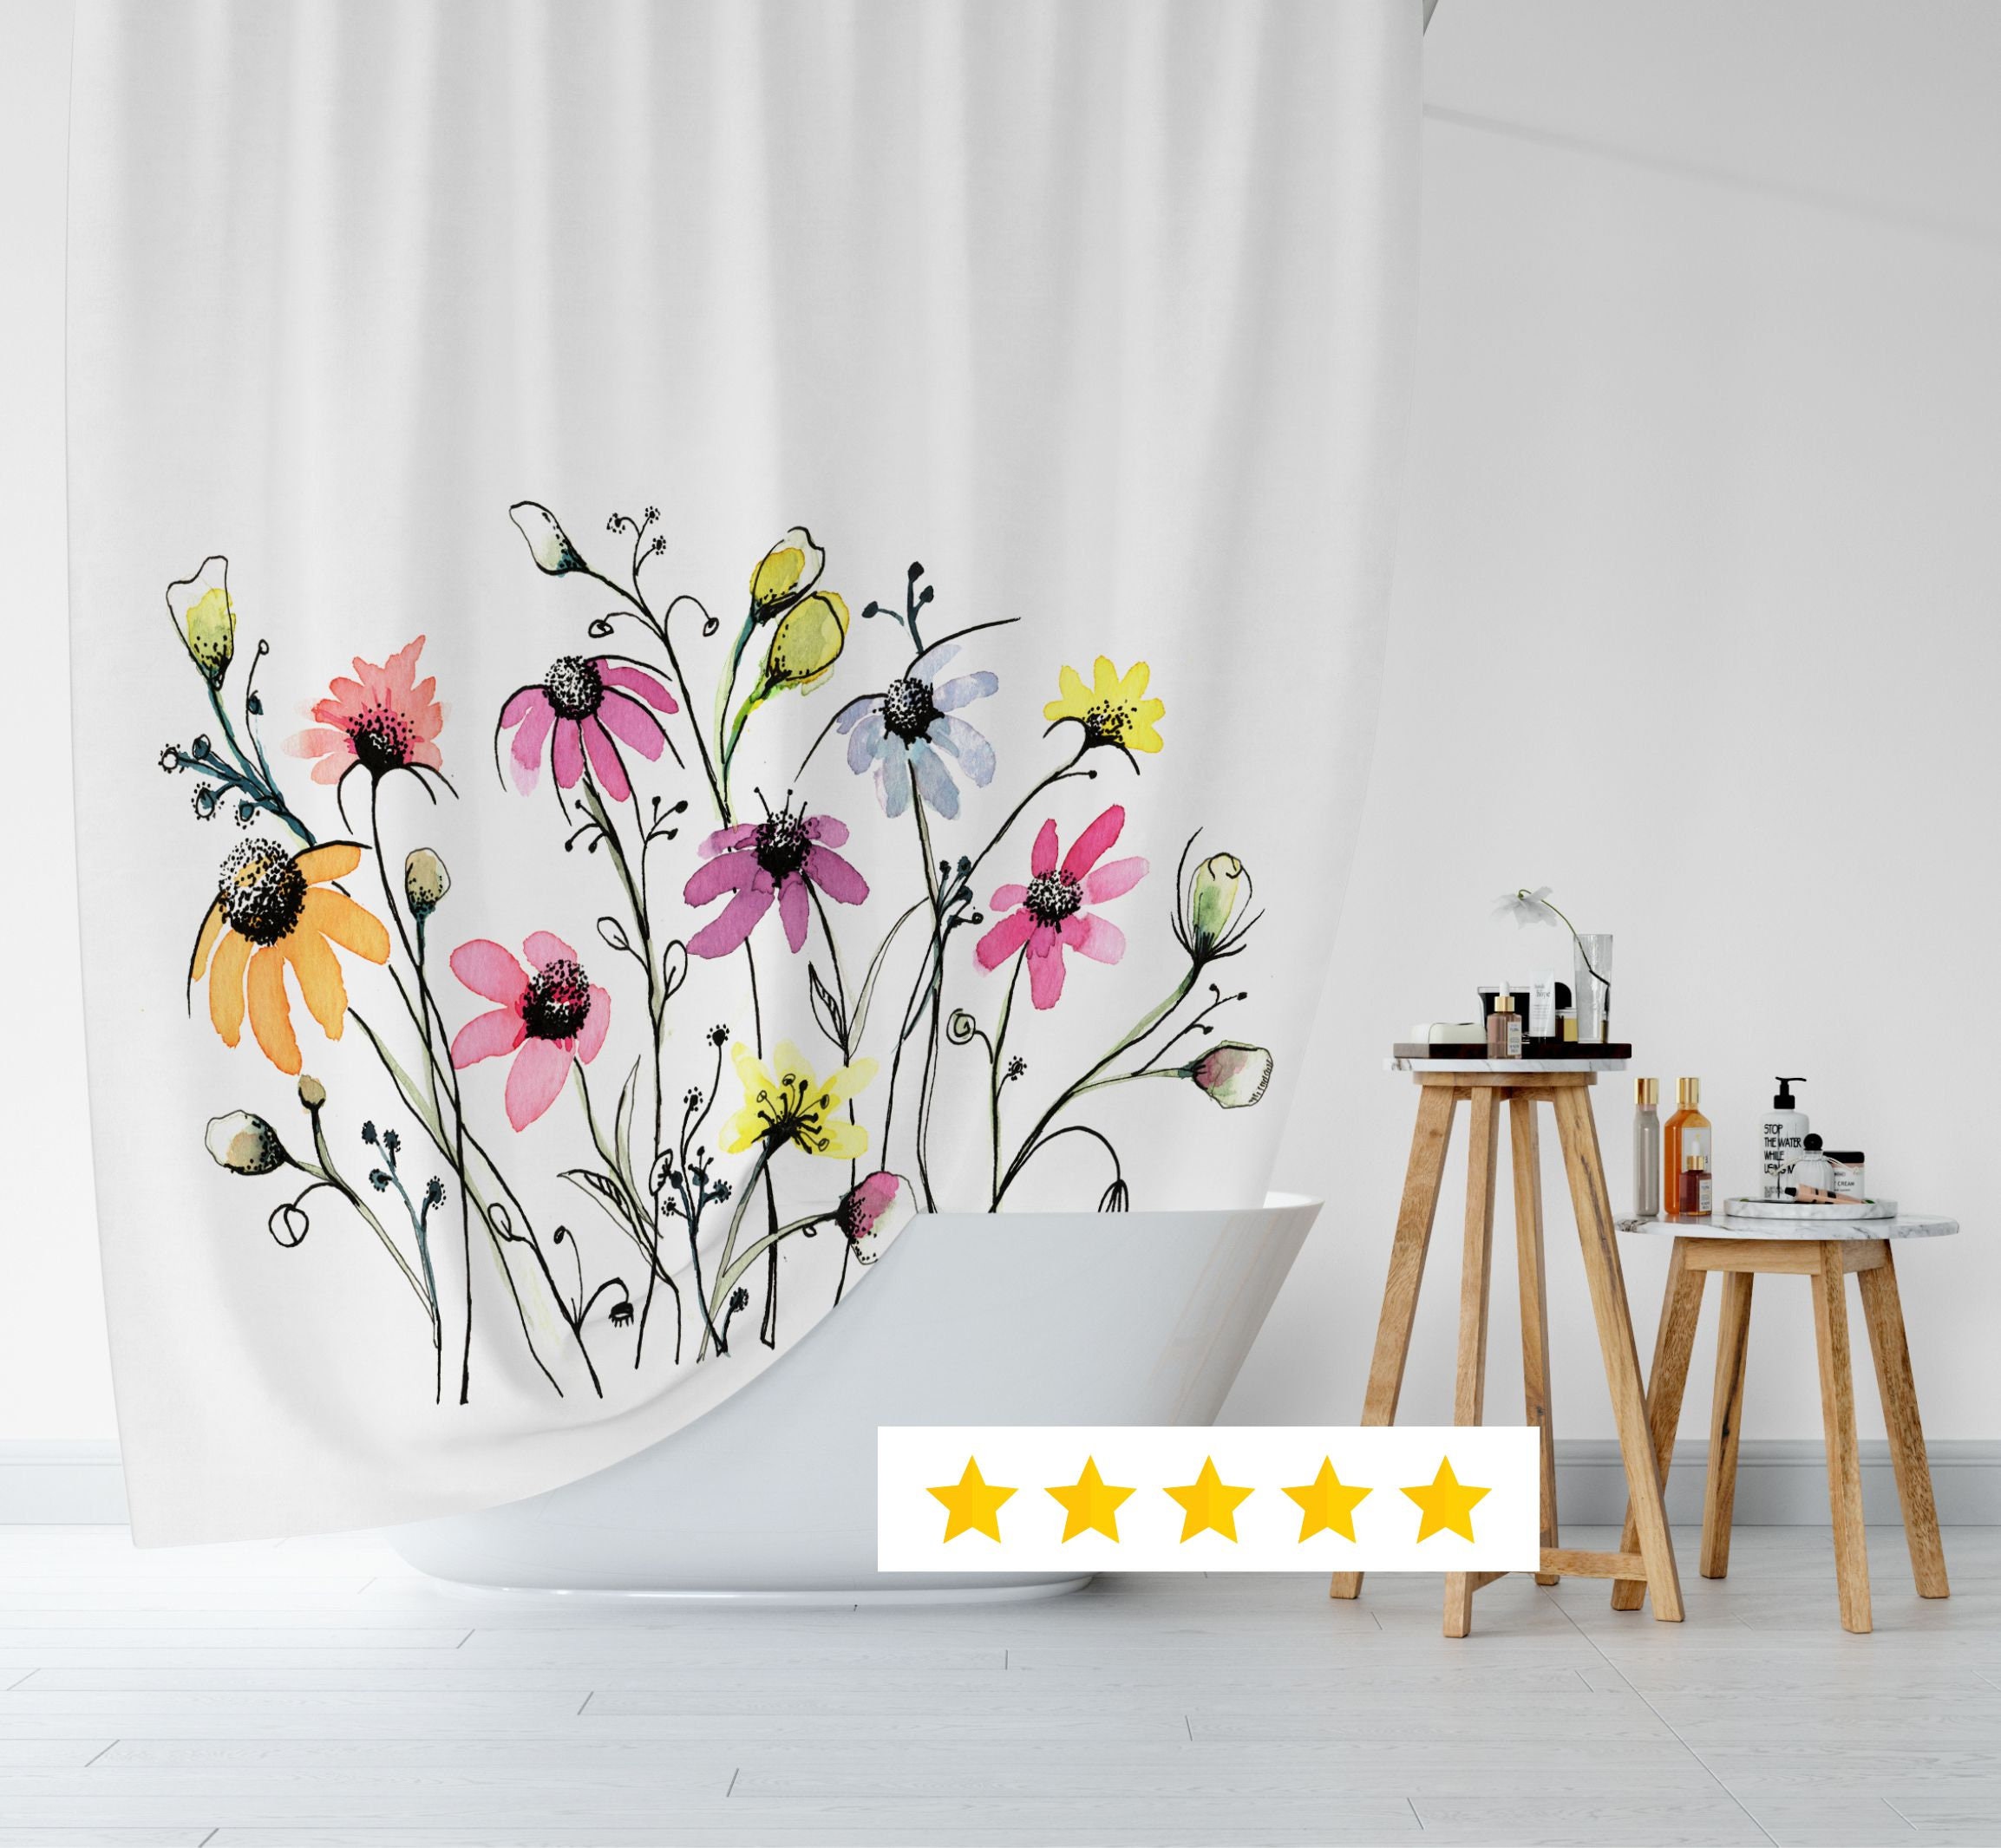  VOUGGIME Shower Curtain Farmhouse White Flowers A Budding Daisy  Waterproof Fabric Shower Curtains Set for Bathroom Accessory Bohemian Bathroom  Decor with 12pcs Hooks(36x72inches) White Green : Home & Kitchen